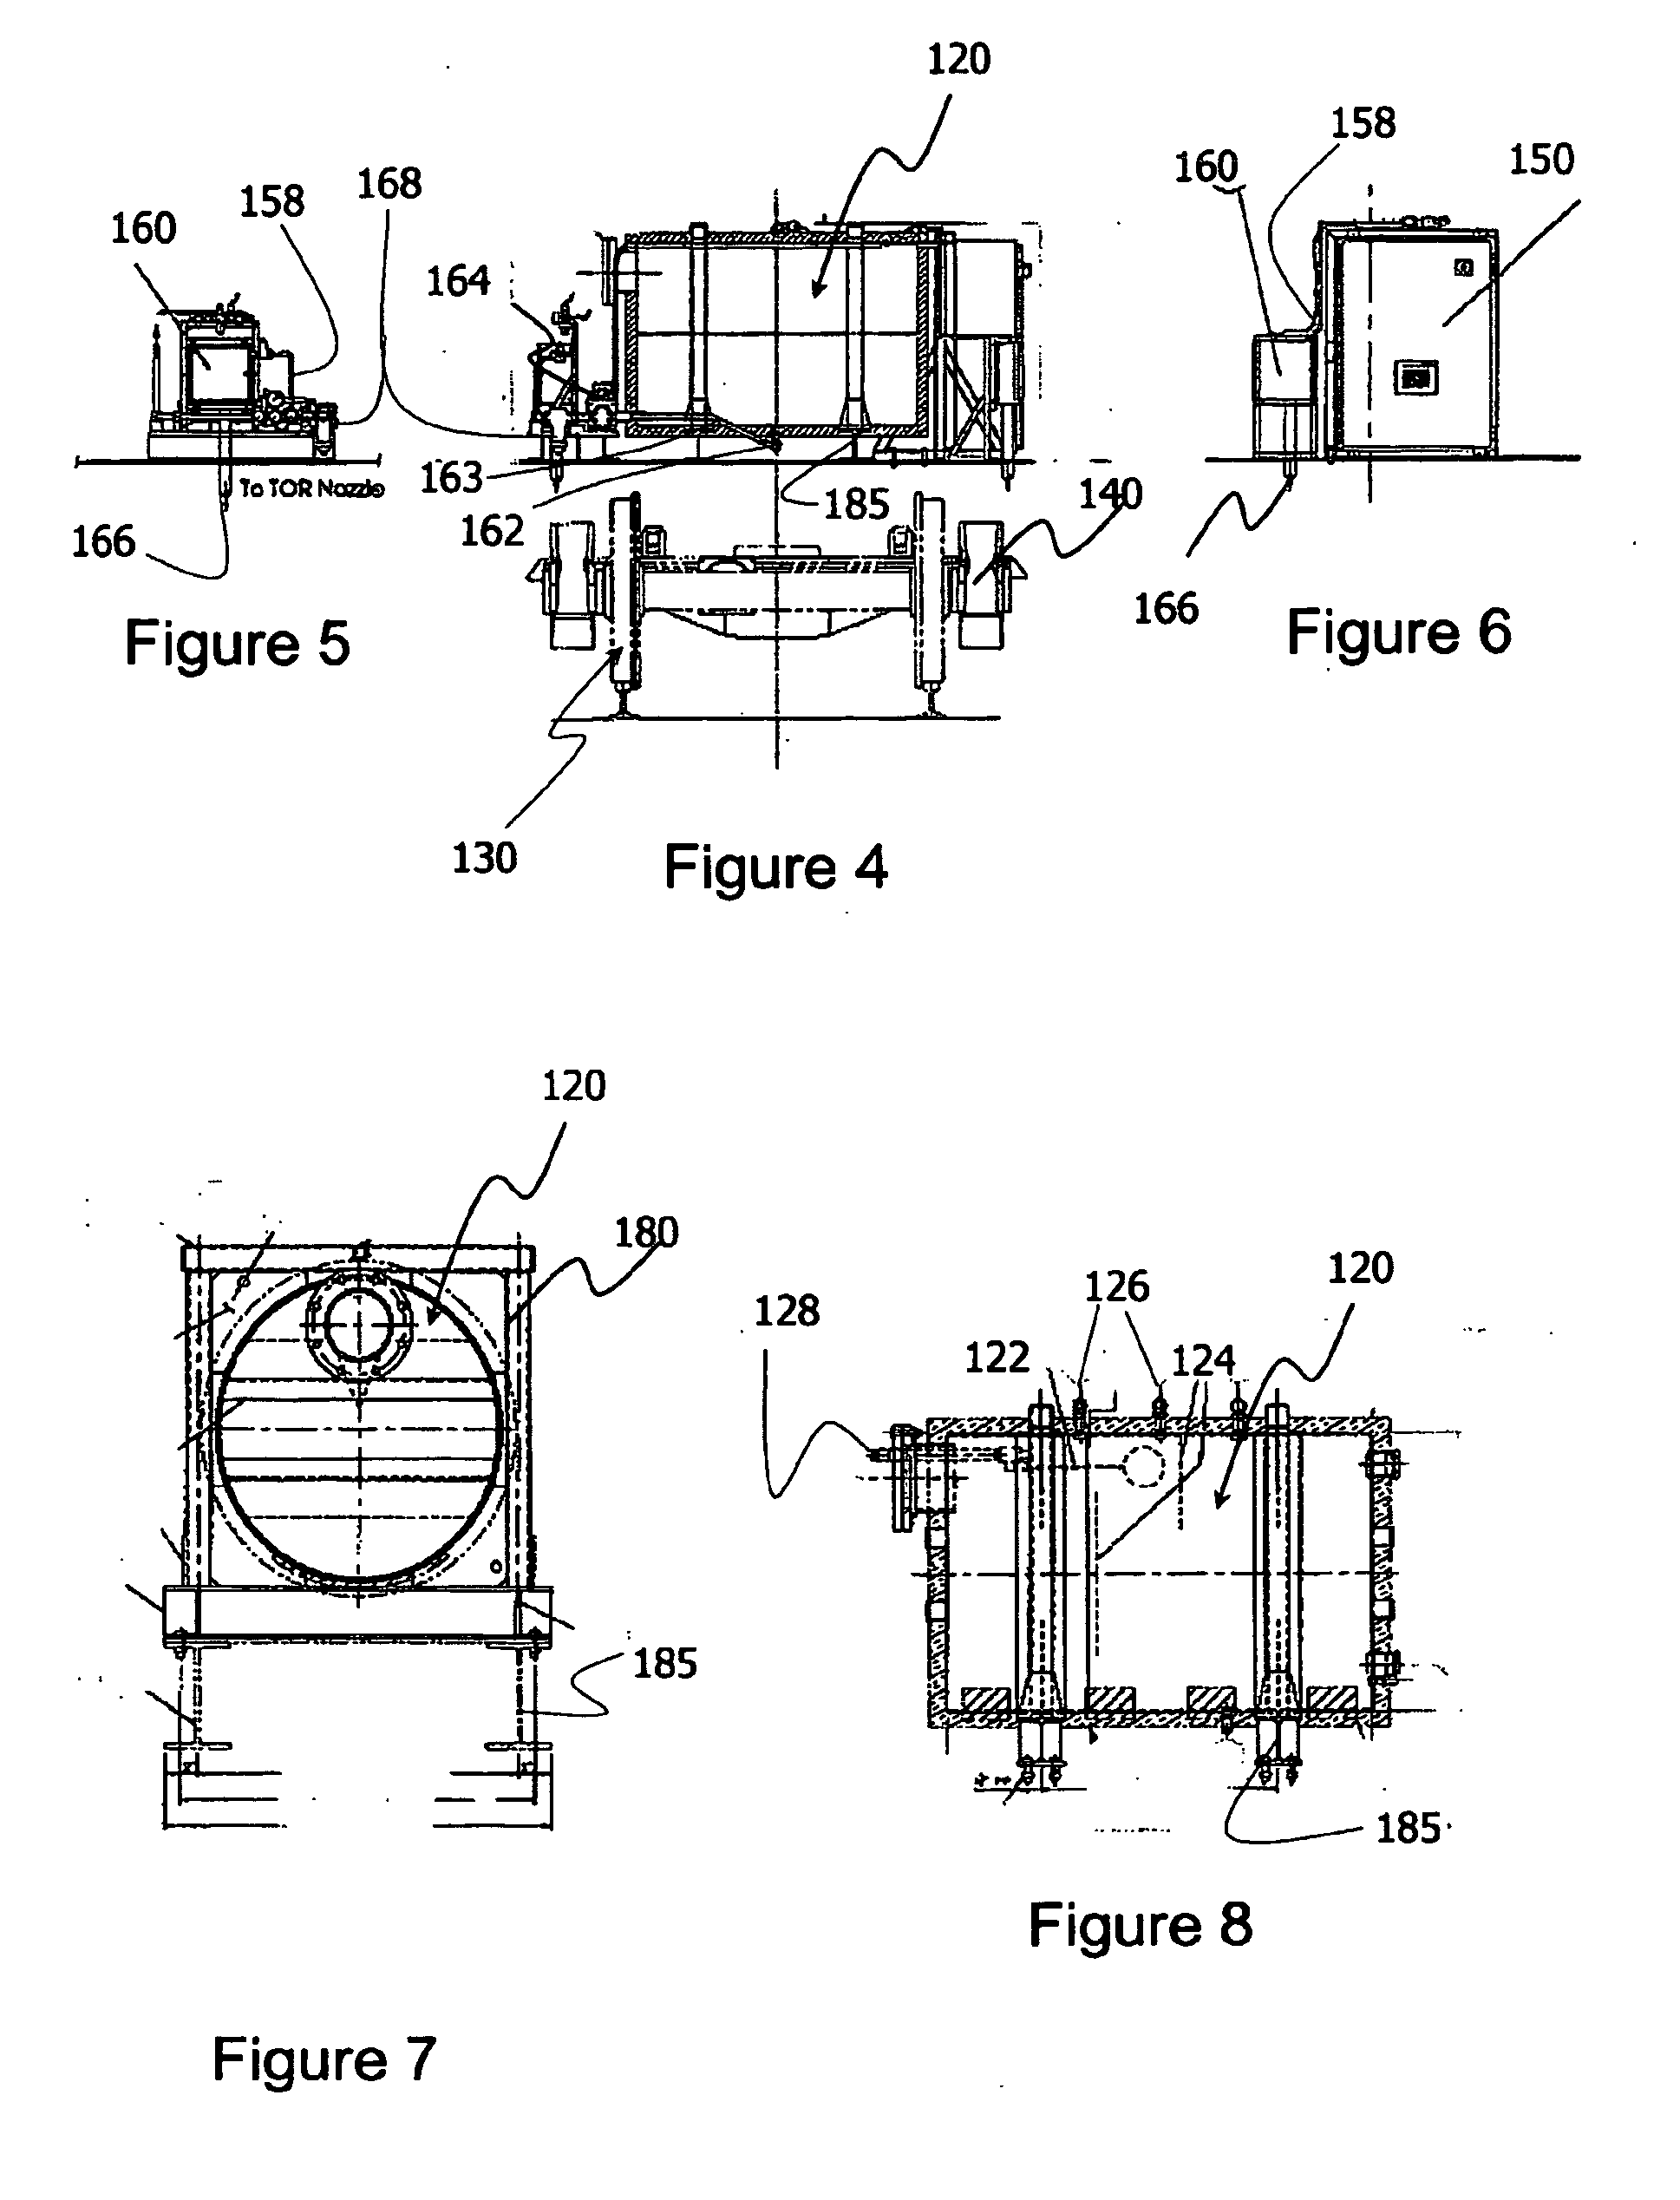 Method And Apparatus For Applying Liquid Compositions In Rail Systems